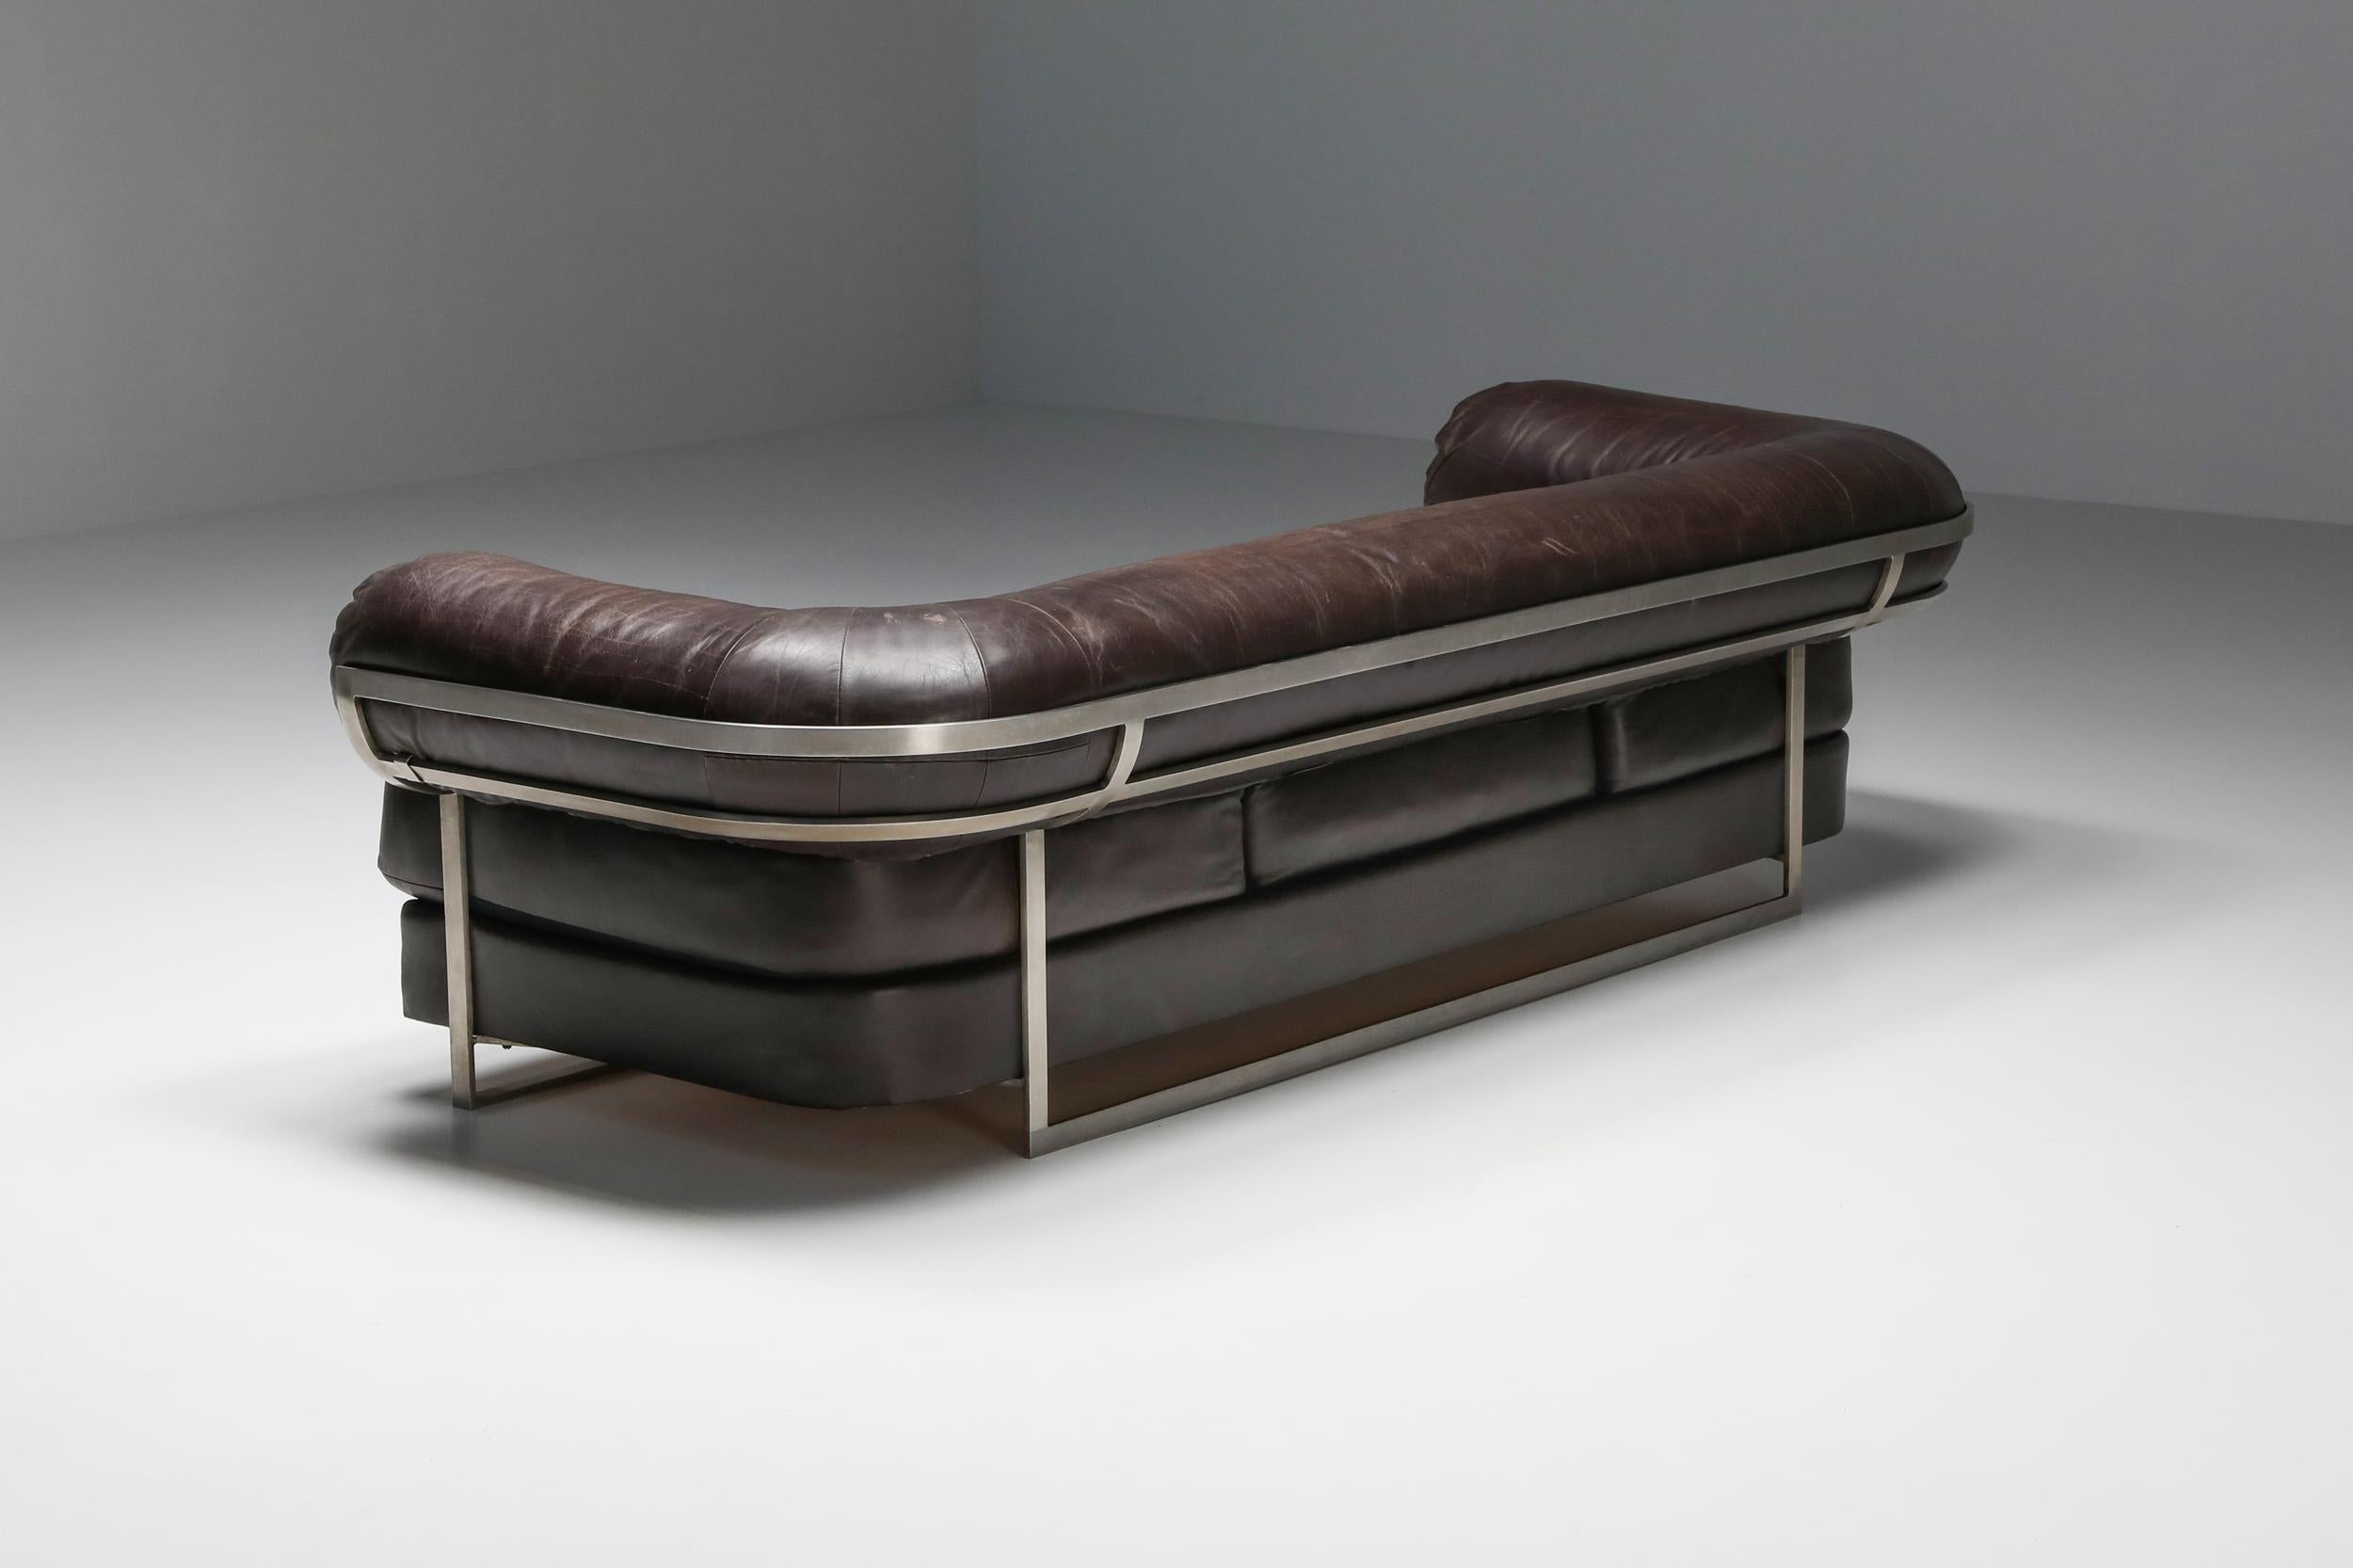 Post-Modern Charpentier Brown Leather 'Apollo' Sofa in Stainless Steel Frame, 1960s